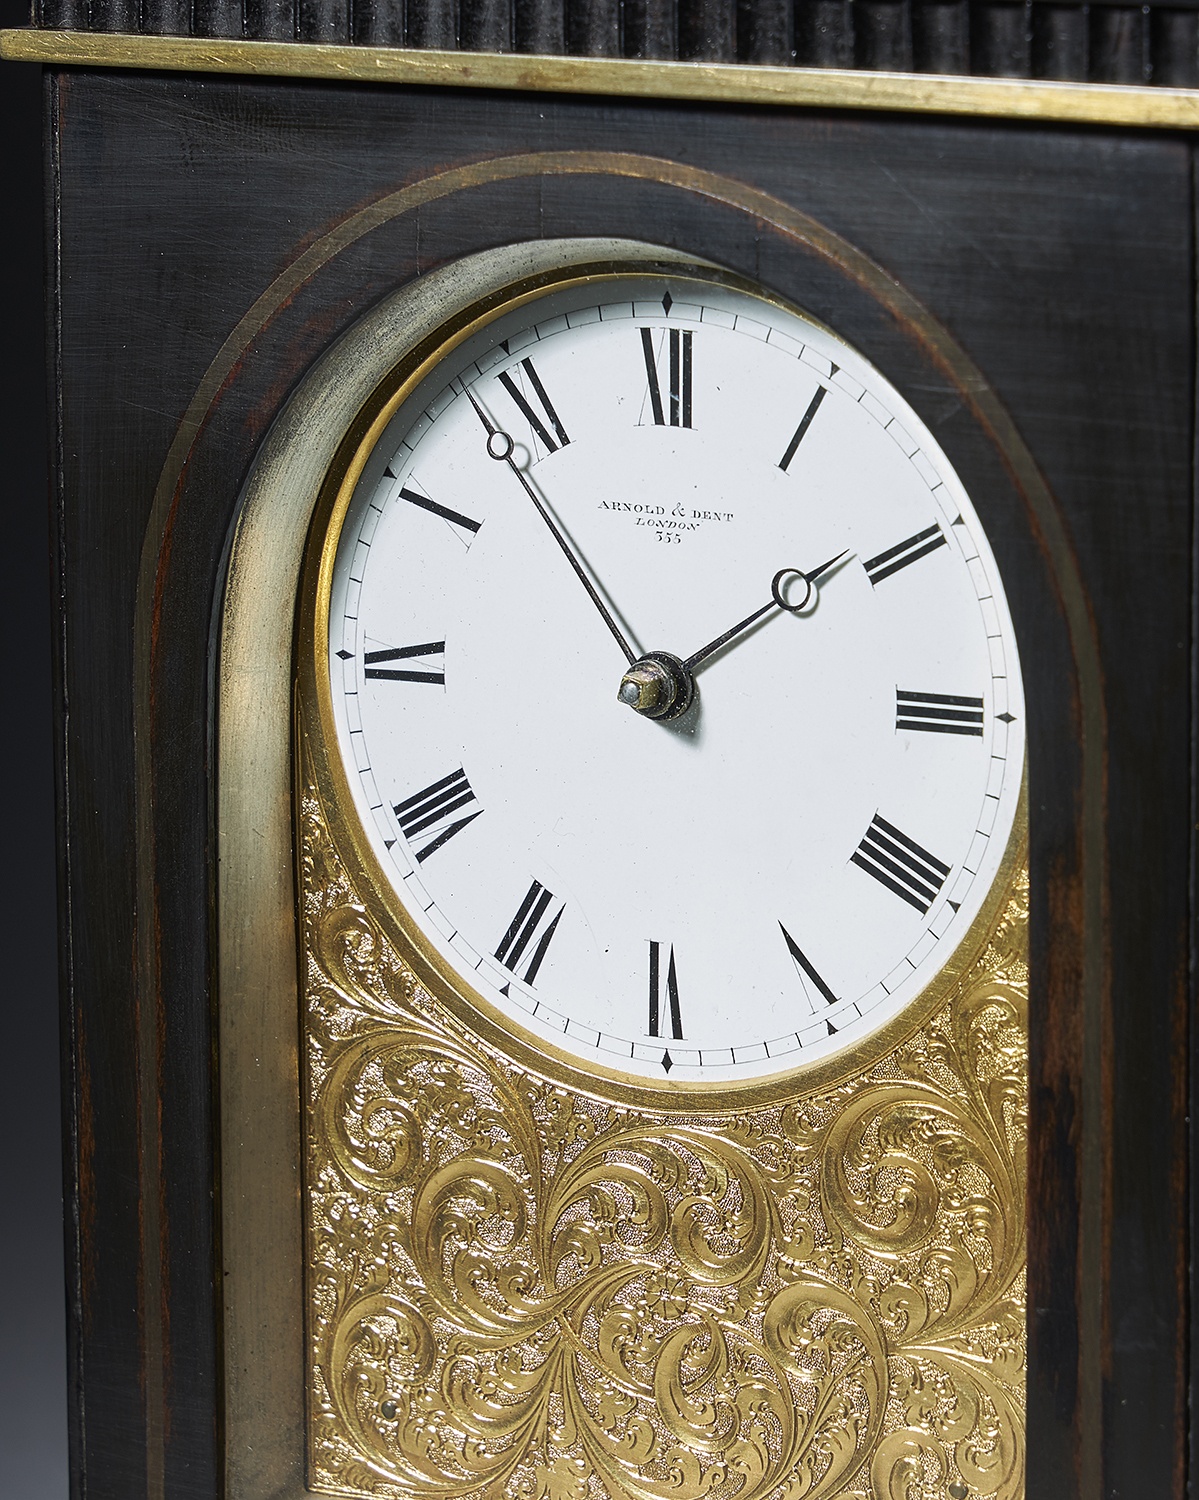 A Unique And Fine Mid 19th-Century Travelling Clock By Celebrated Makers Arnold & Dent, London 8